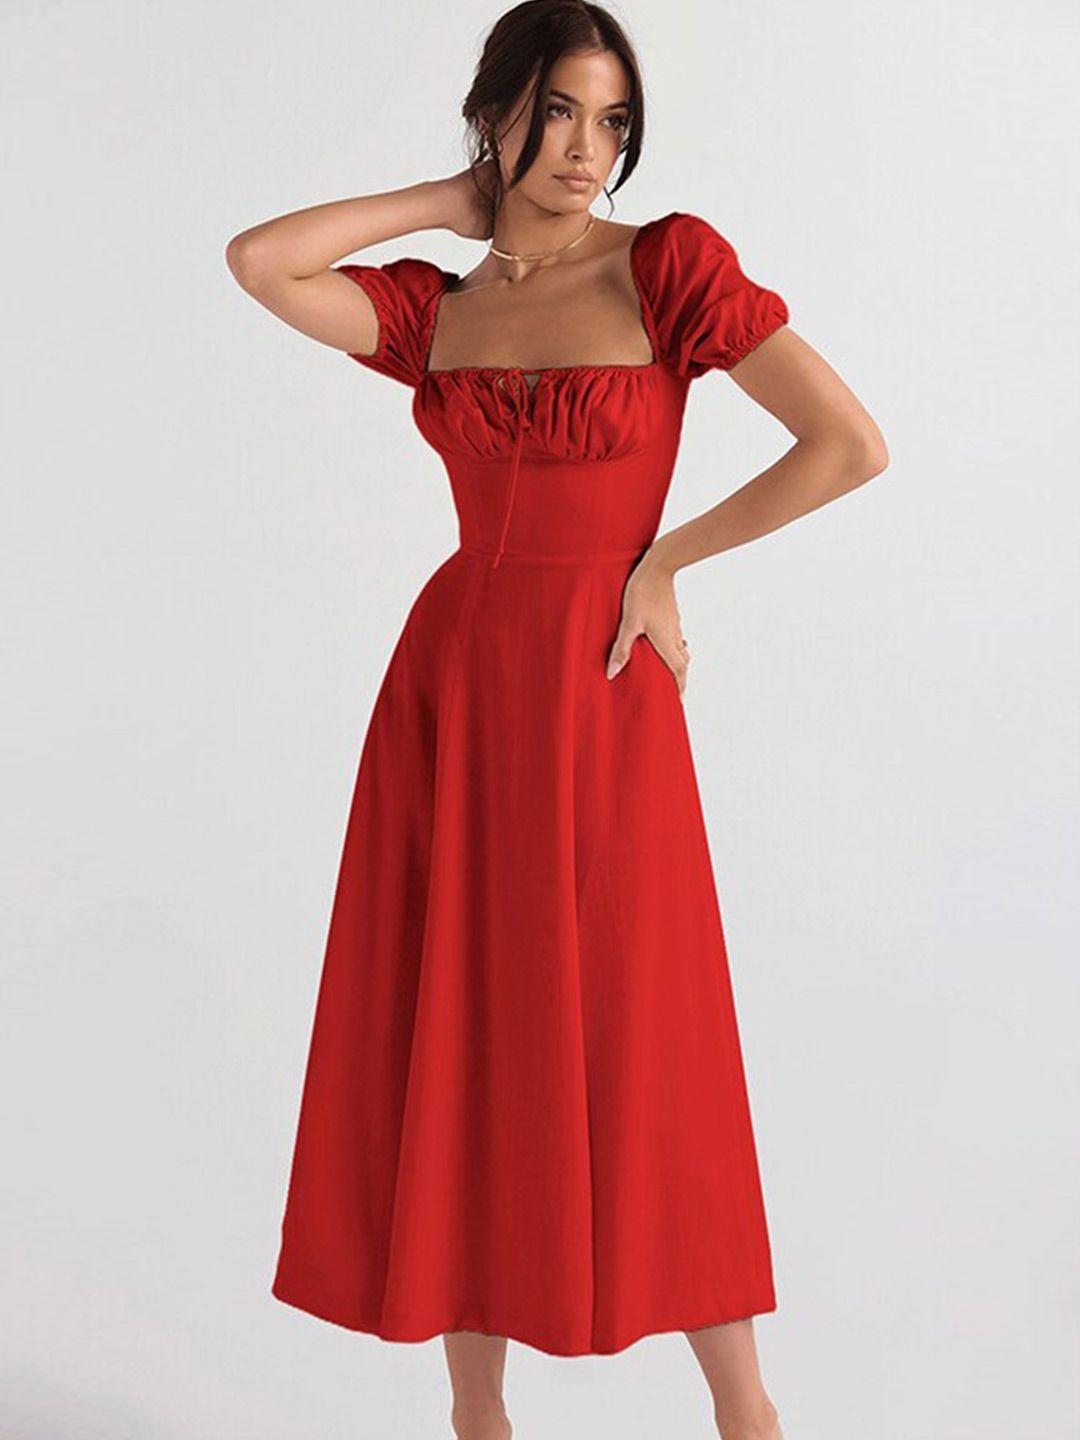 stylecast red square neck puff sleeve fit & flare midi dress